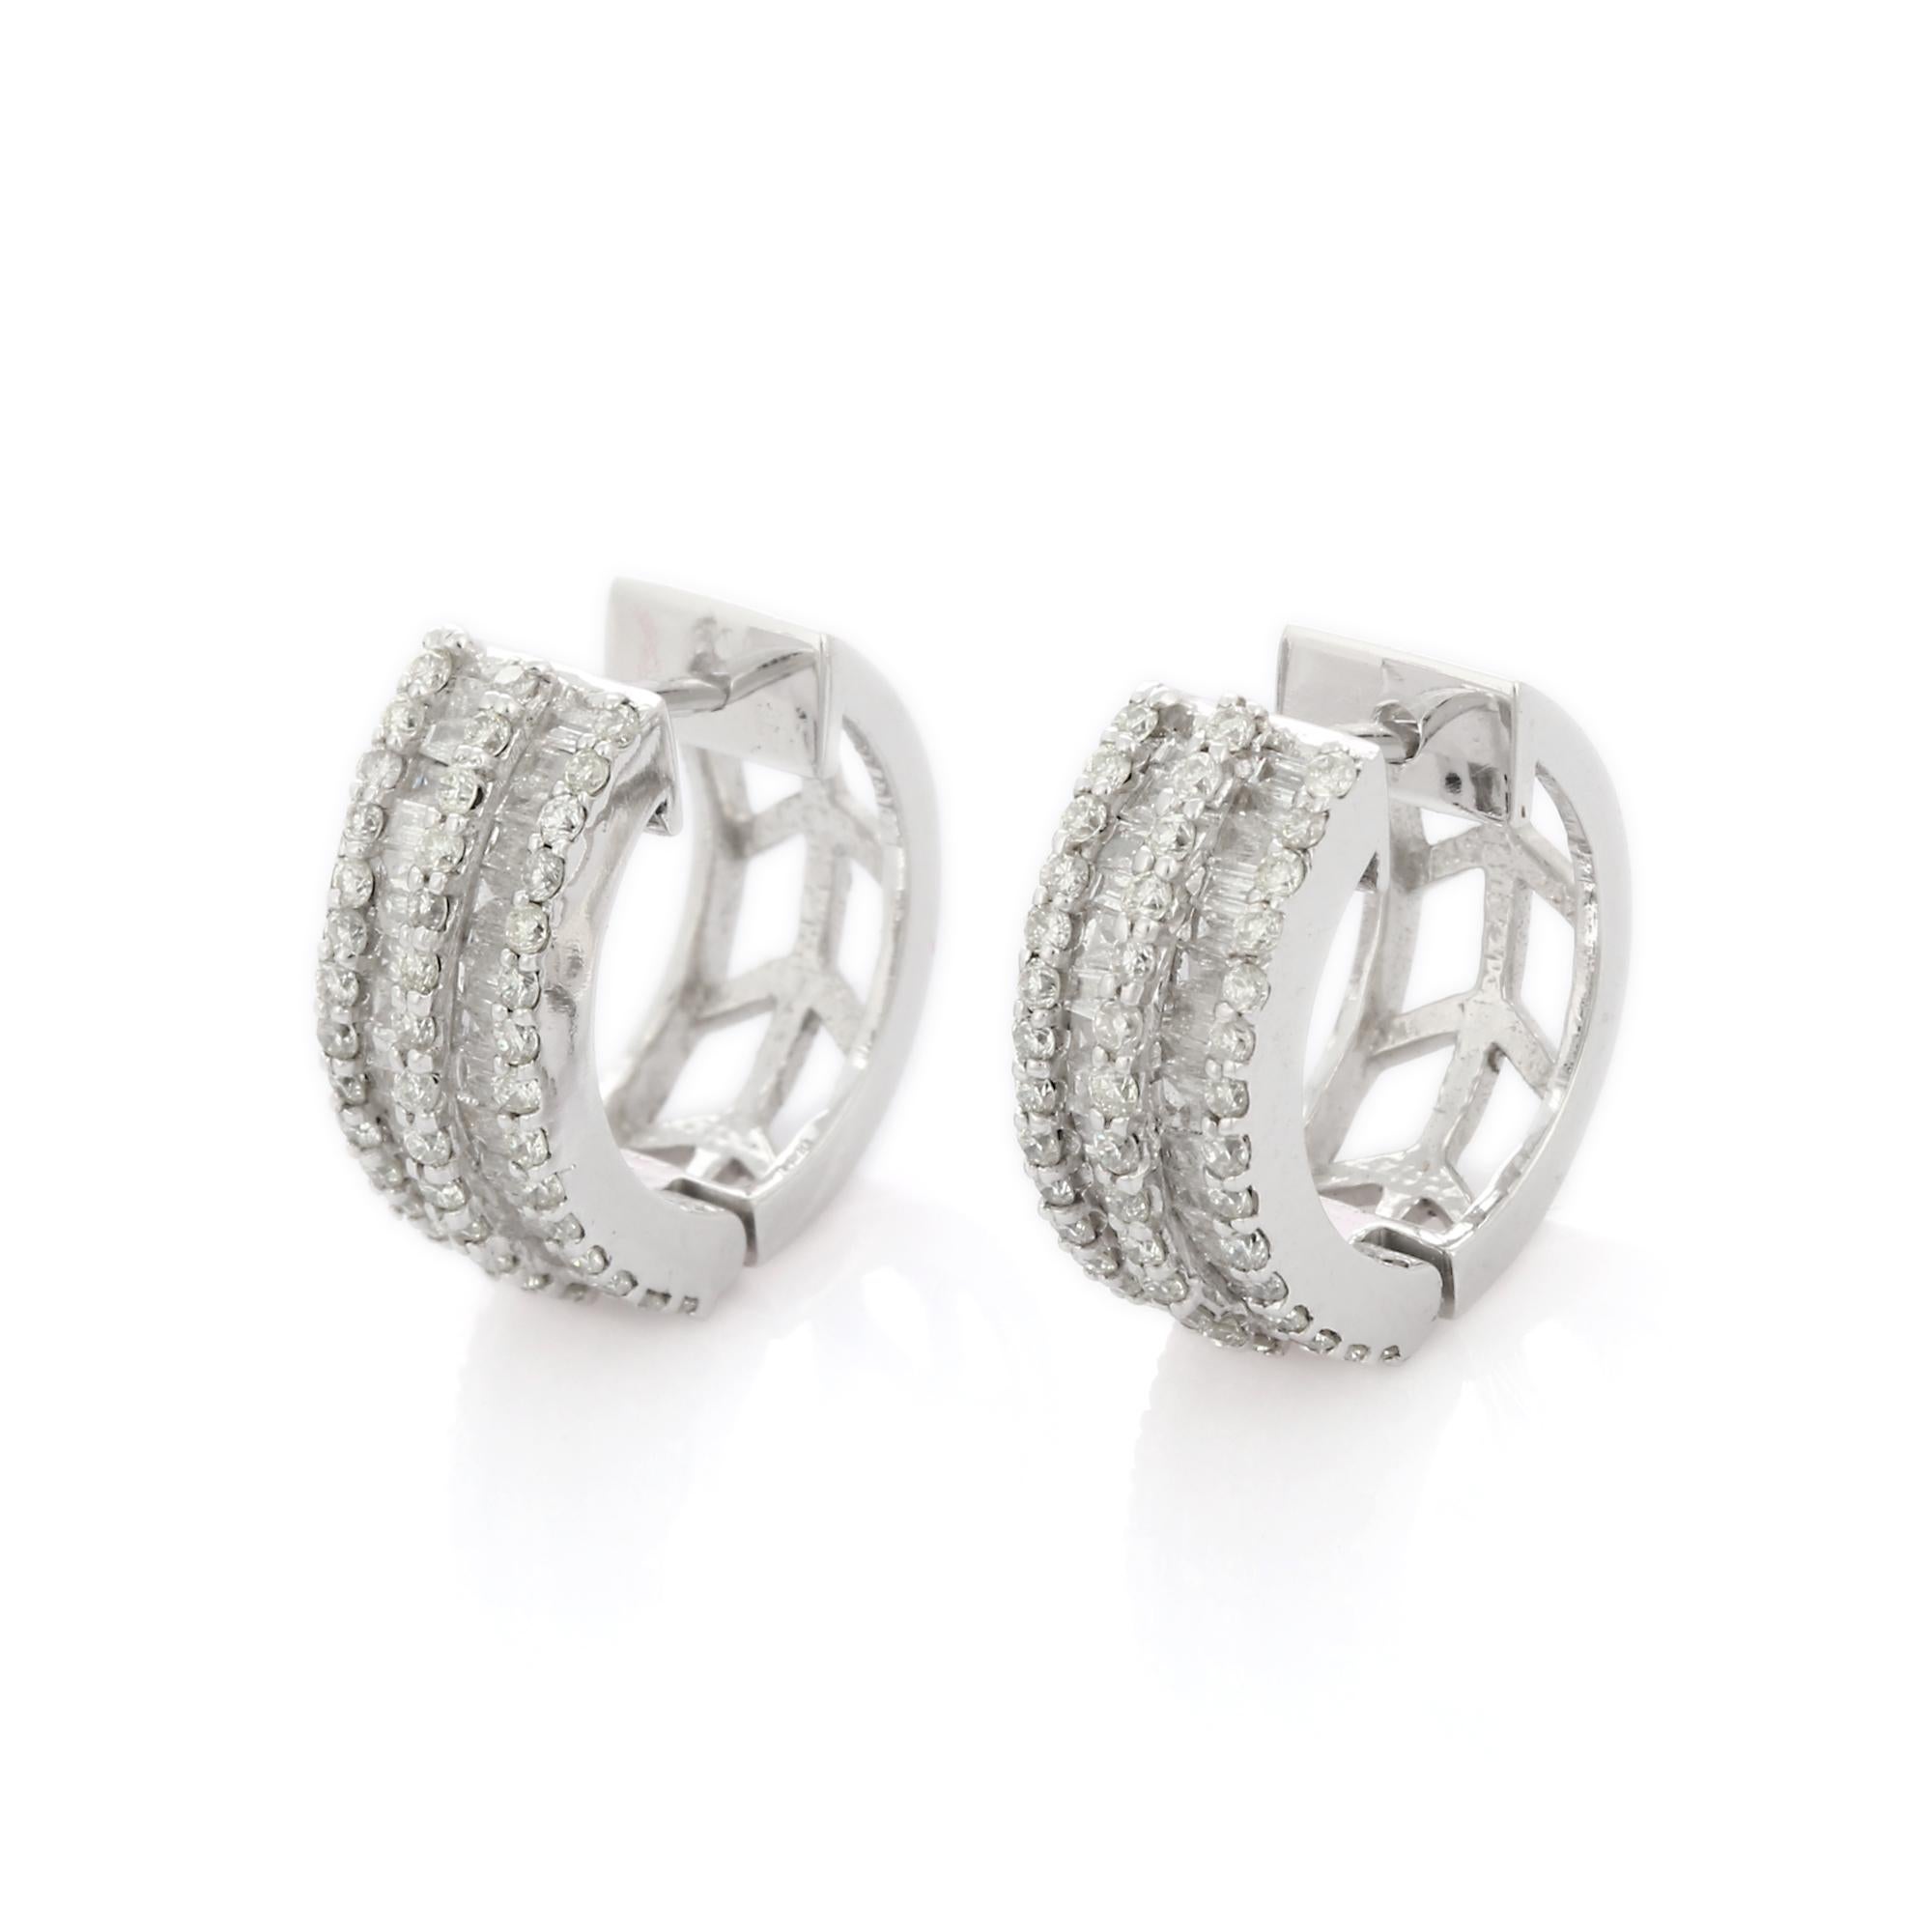 Brilliant 1 Carat Diamond Huggie Hoop Earrings for Wedding in 14K Gold to make a statement with your look. You shall need hoop earrings to make a statement with your look. These earrings create a sparkling, luxurious look featuring brilliant cut